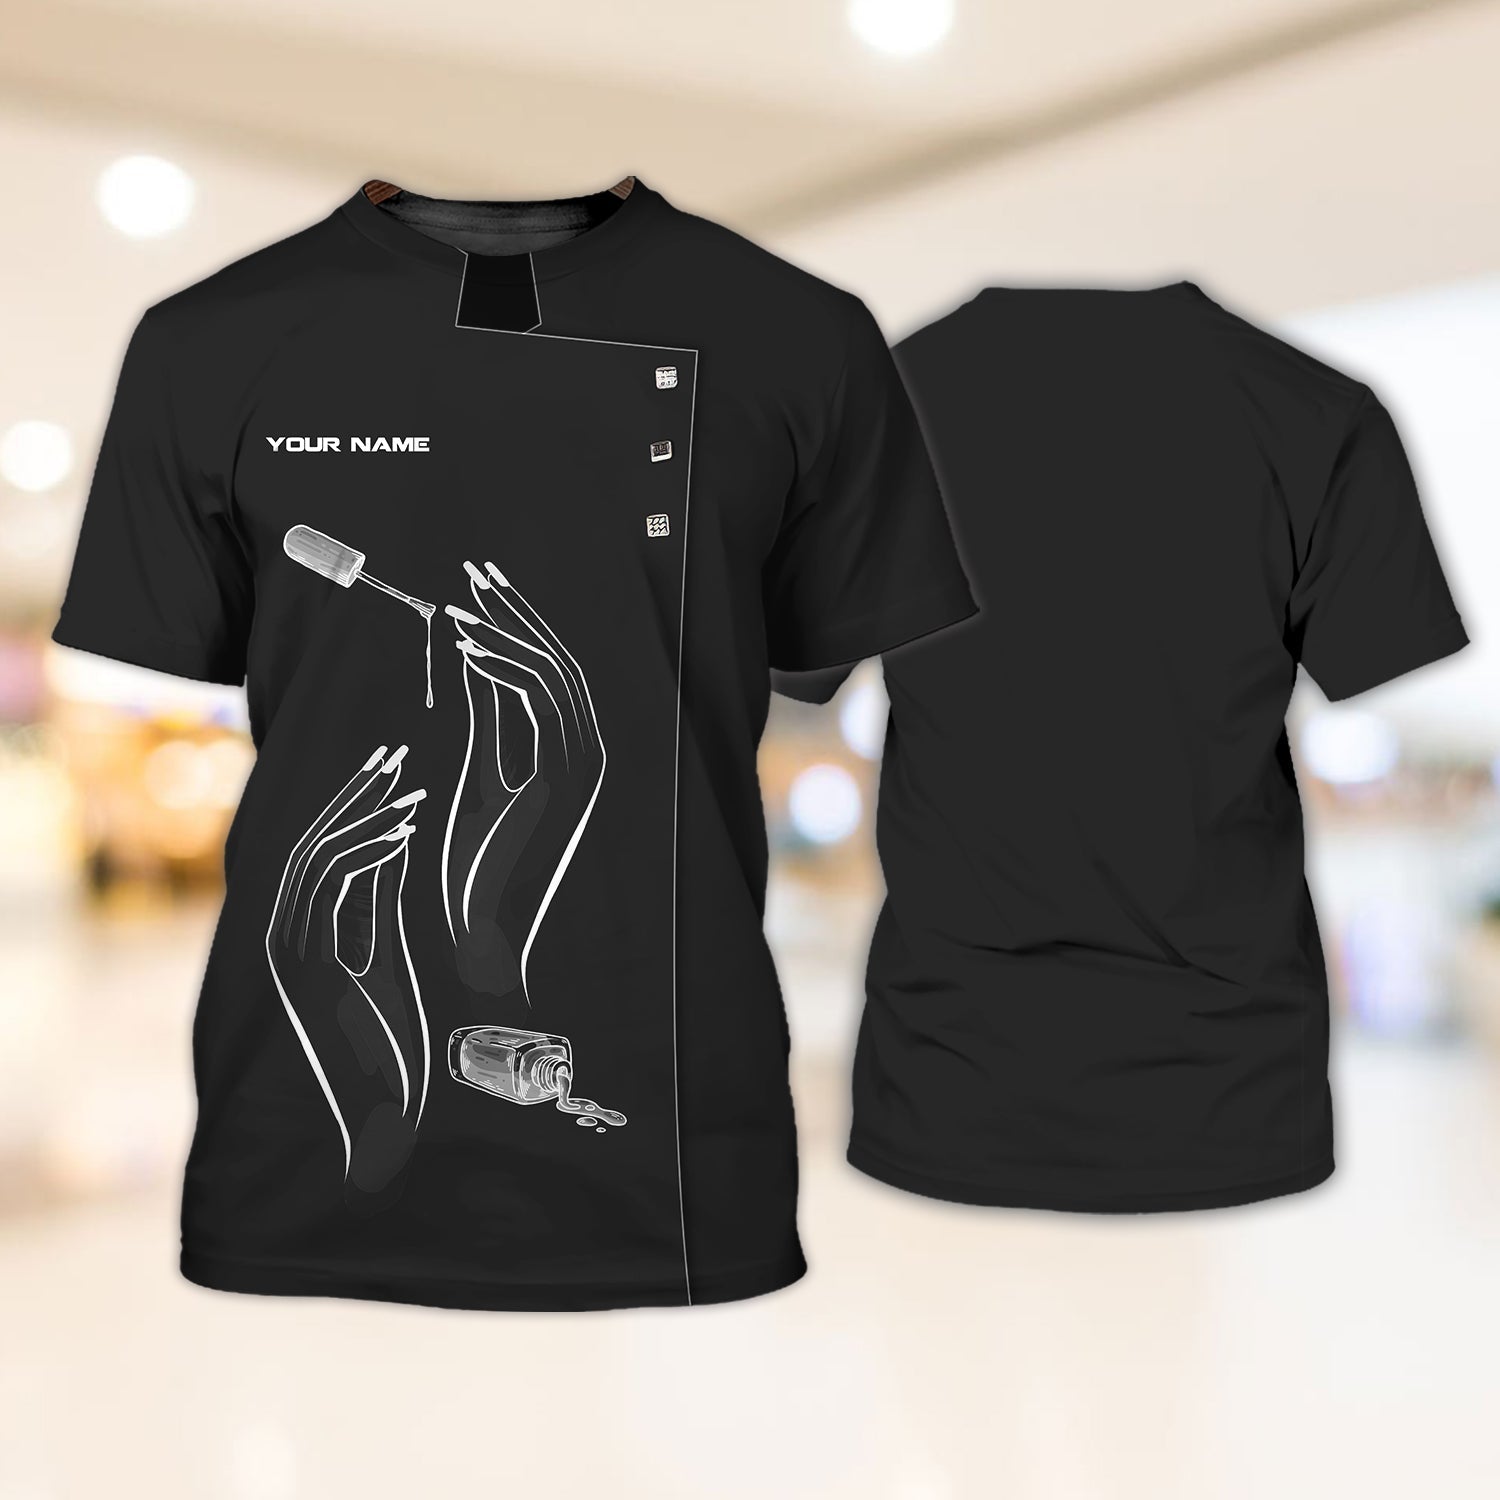 Personalized Black Nail Shirt For Her/ New Gift For Nail Technician/ Best Tshirt For Nail Tech